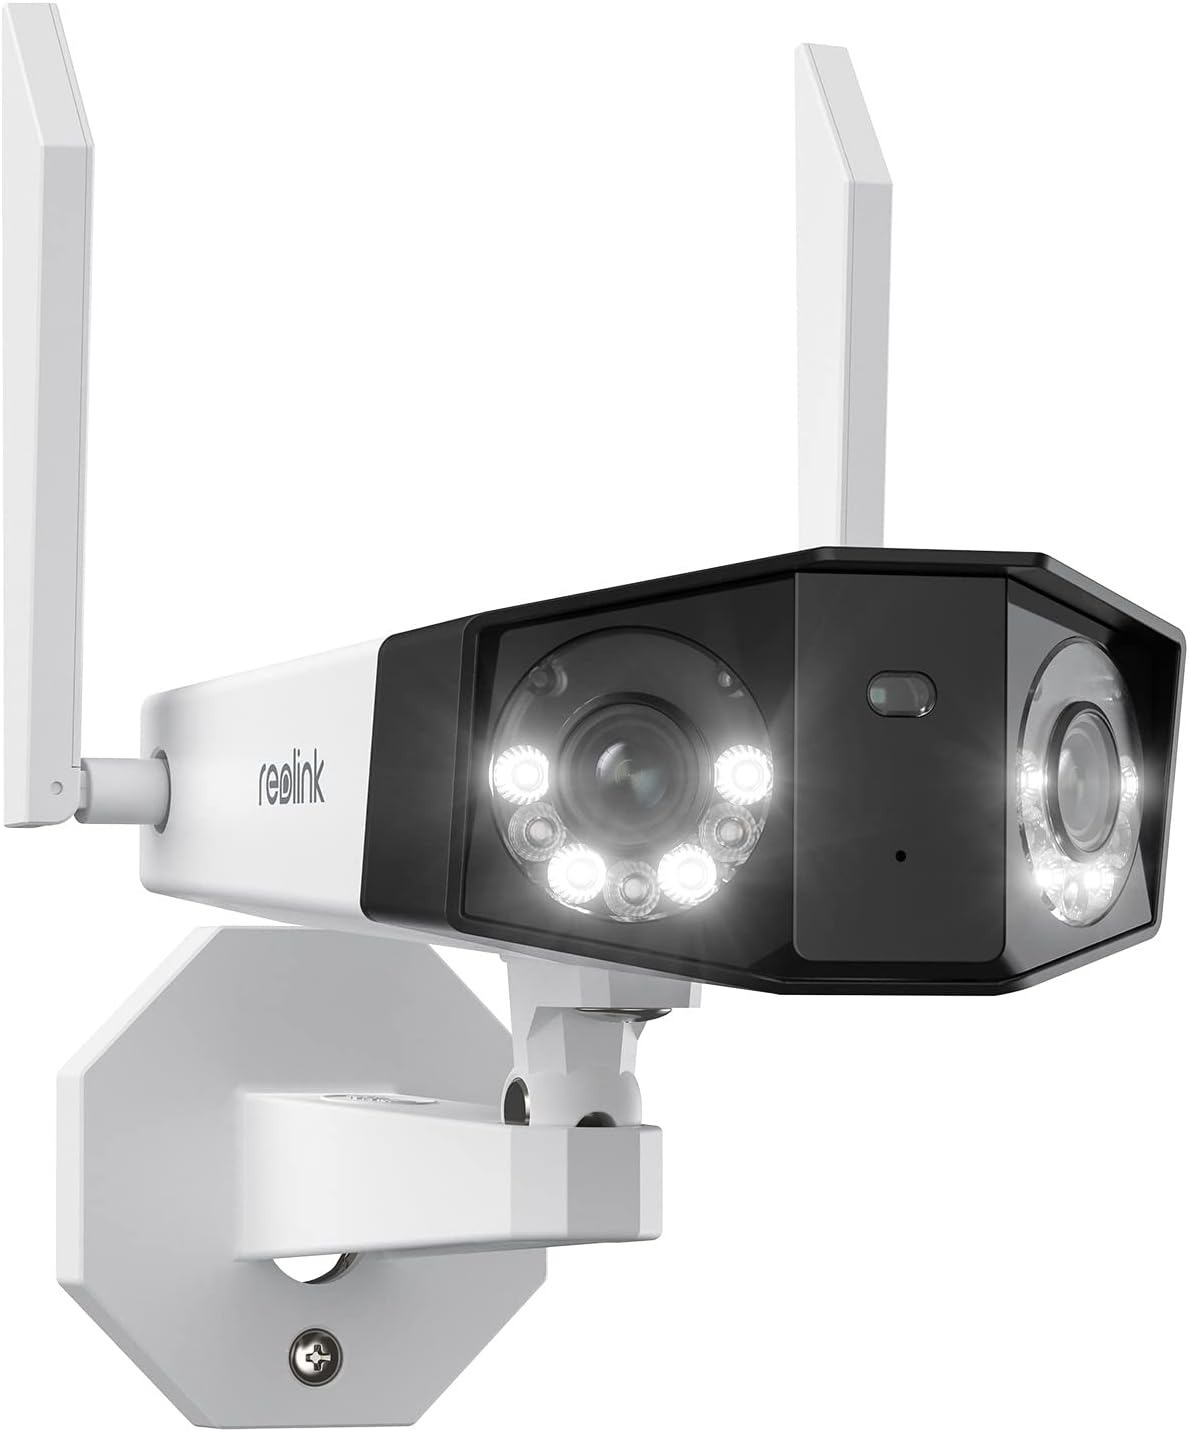 4K Reolink Duo 2 WiFi Dual Lens Wired Security Camera w/ 180° Panorama, Spotlights, Two-Way Audio $108 + Free Shipping